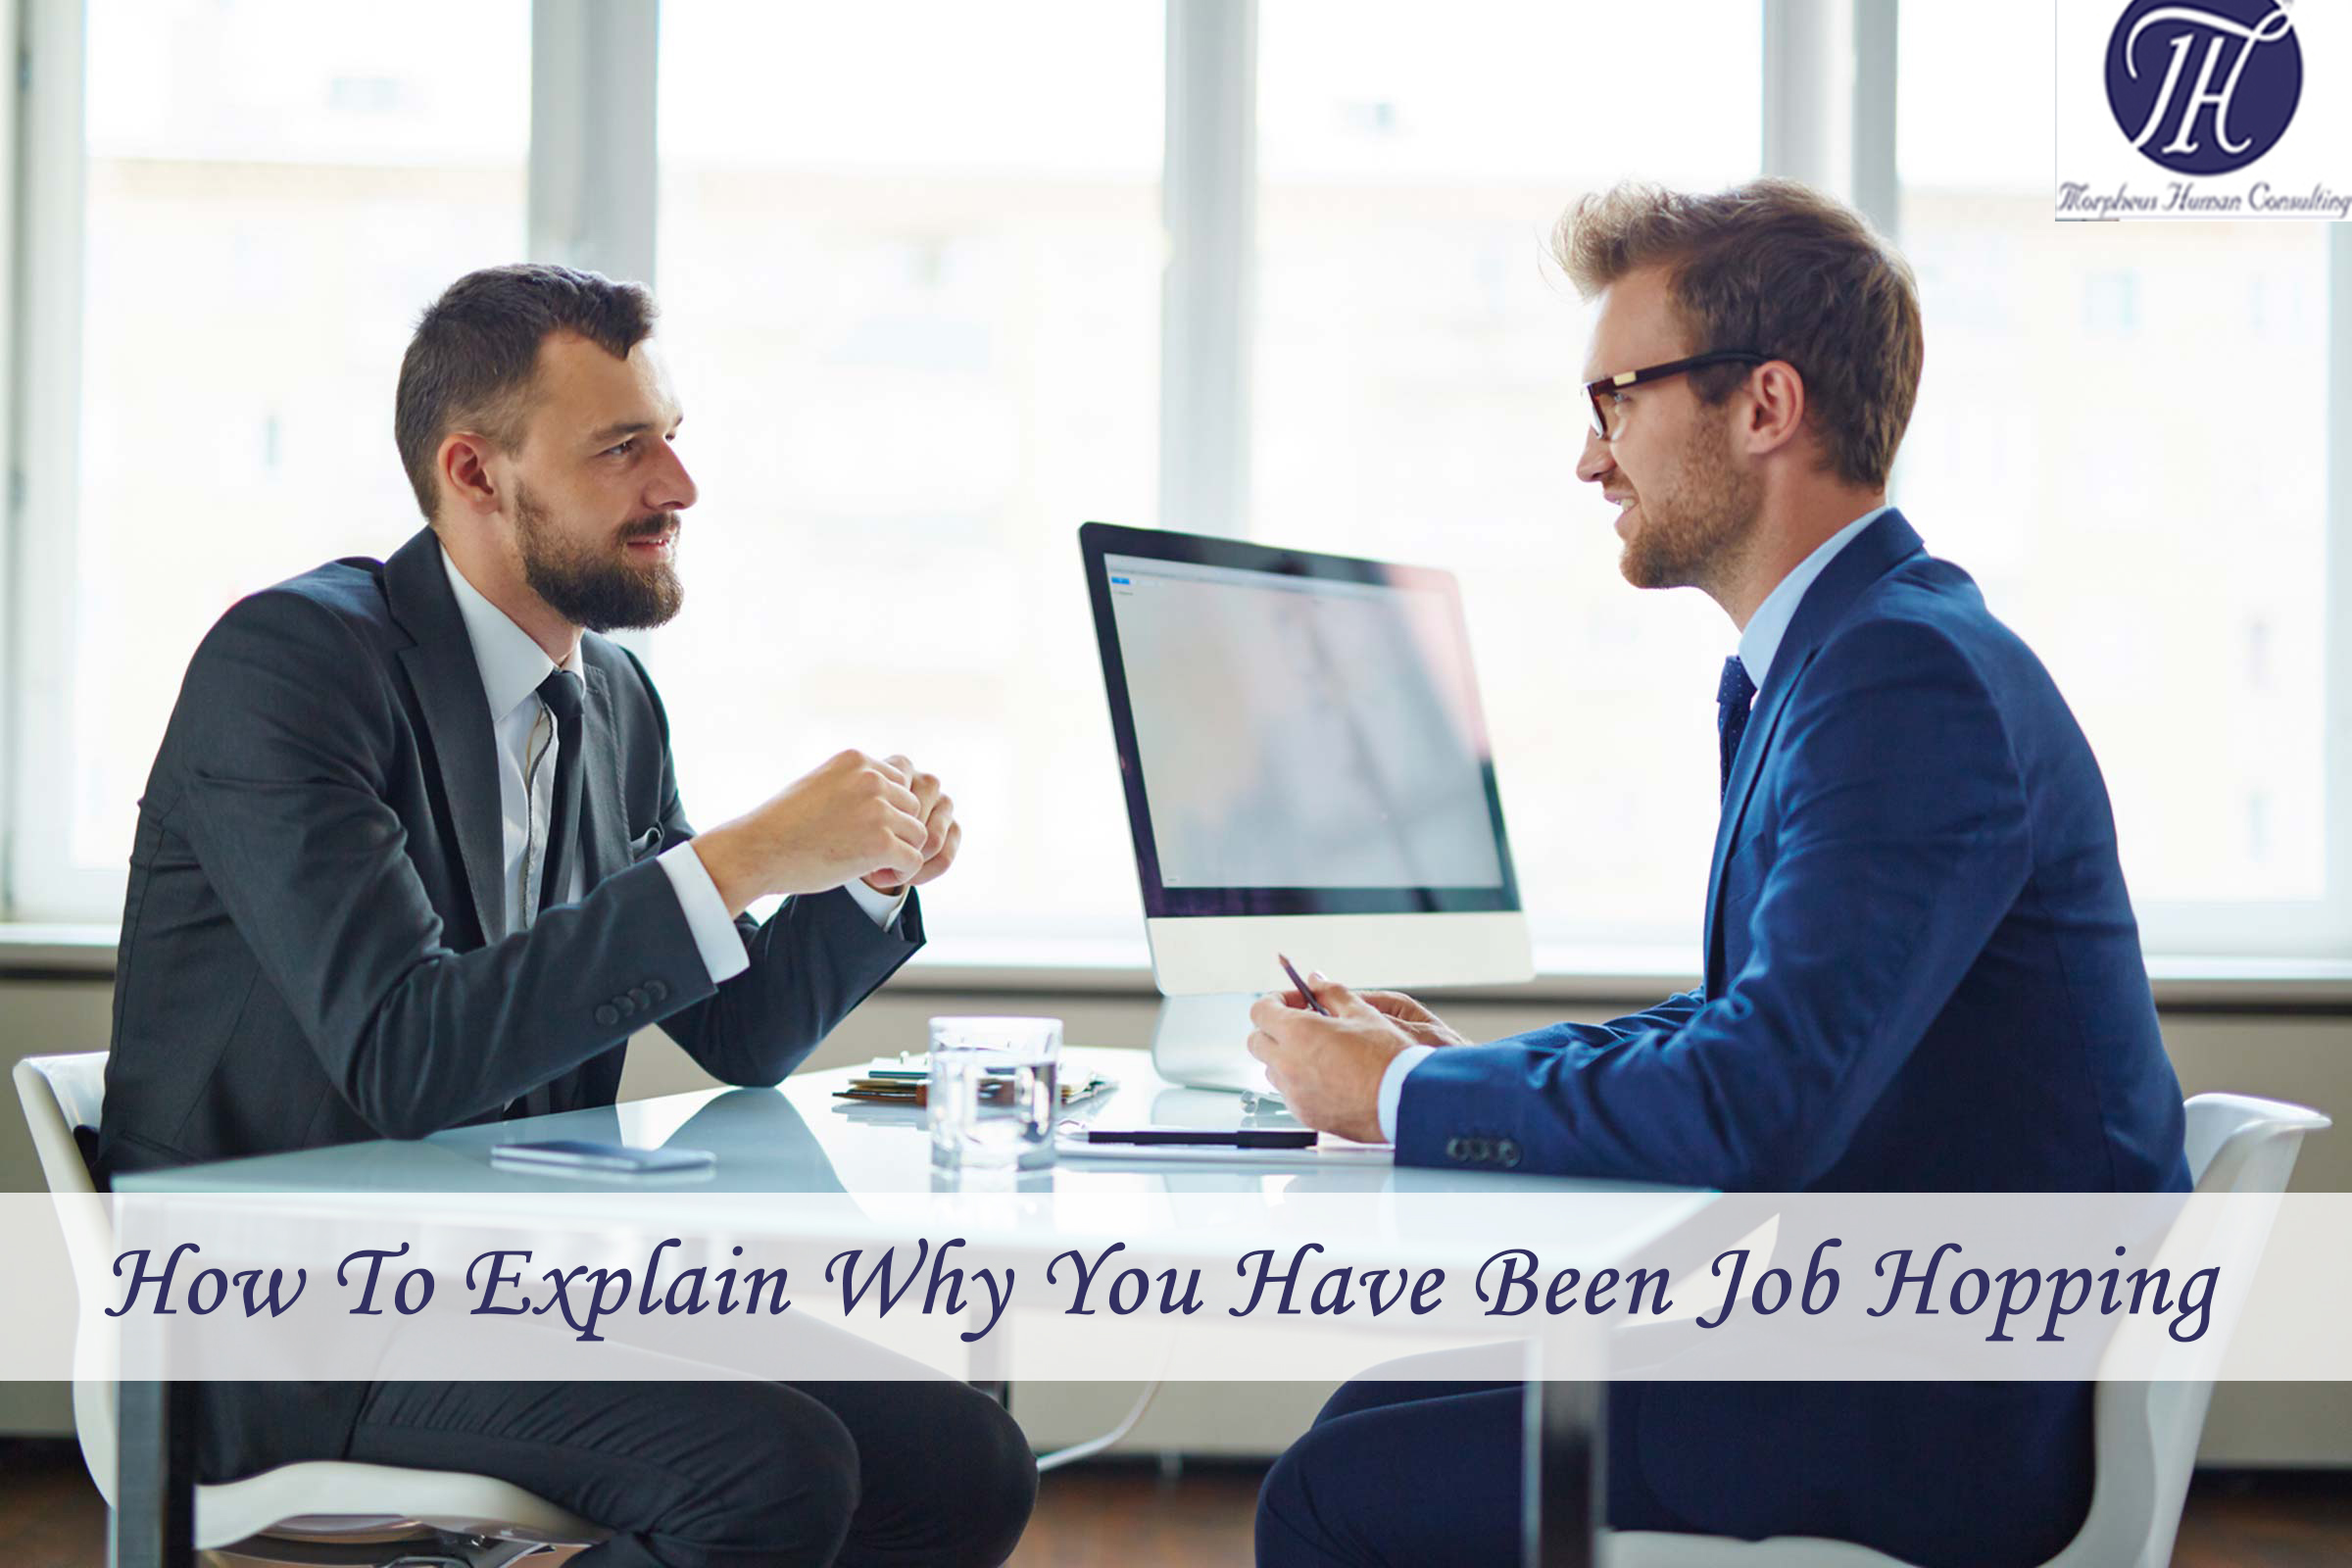 How to Explain Why You Have Been Job Hopping